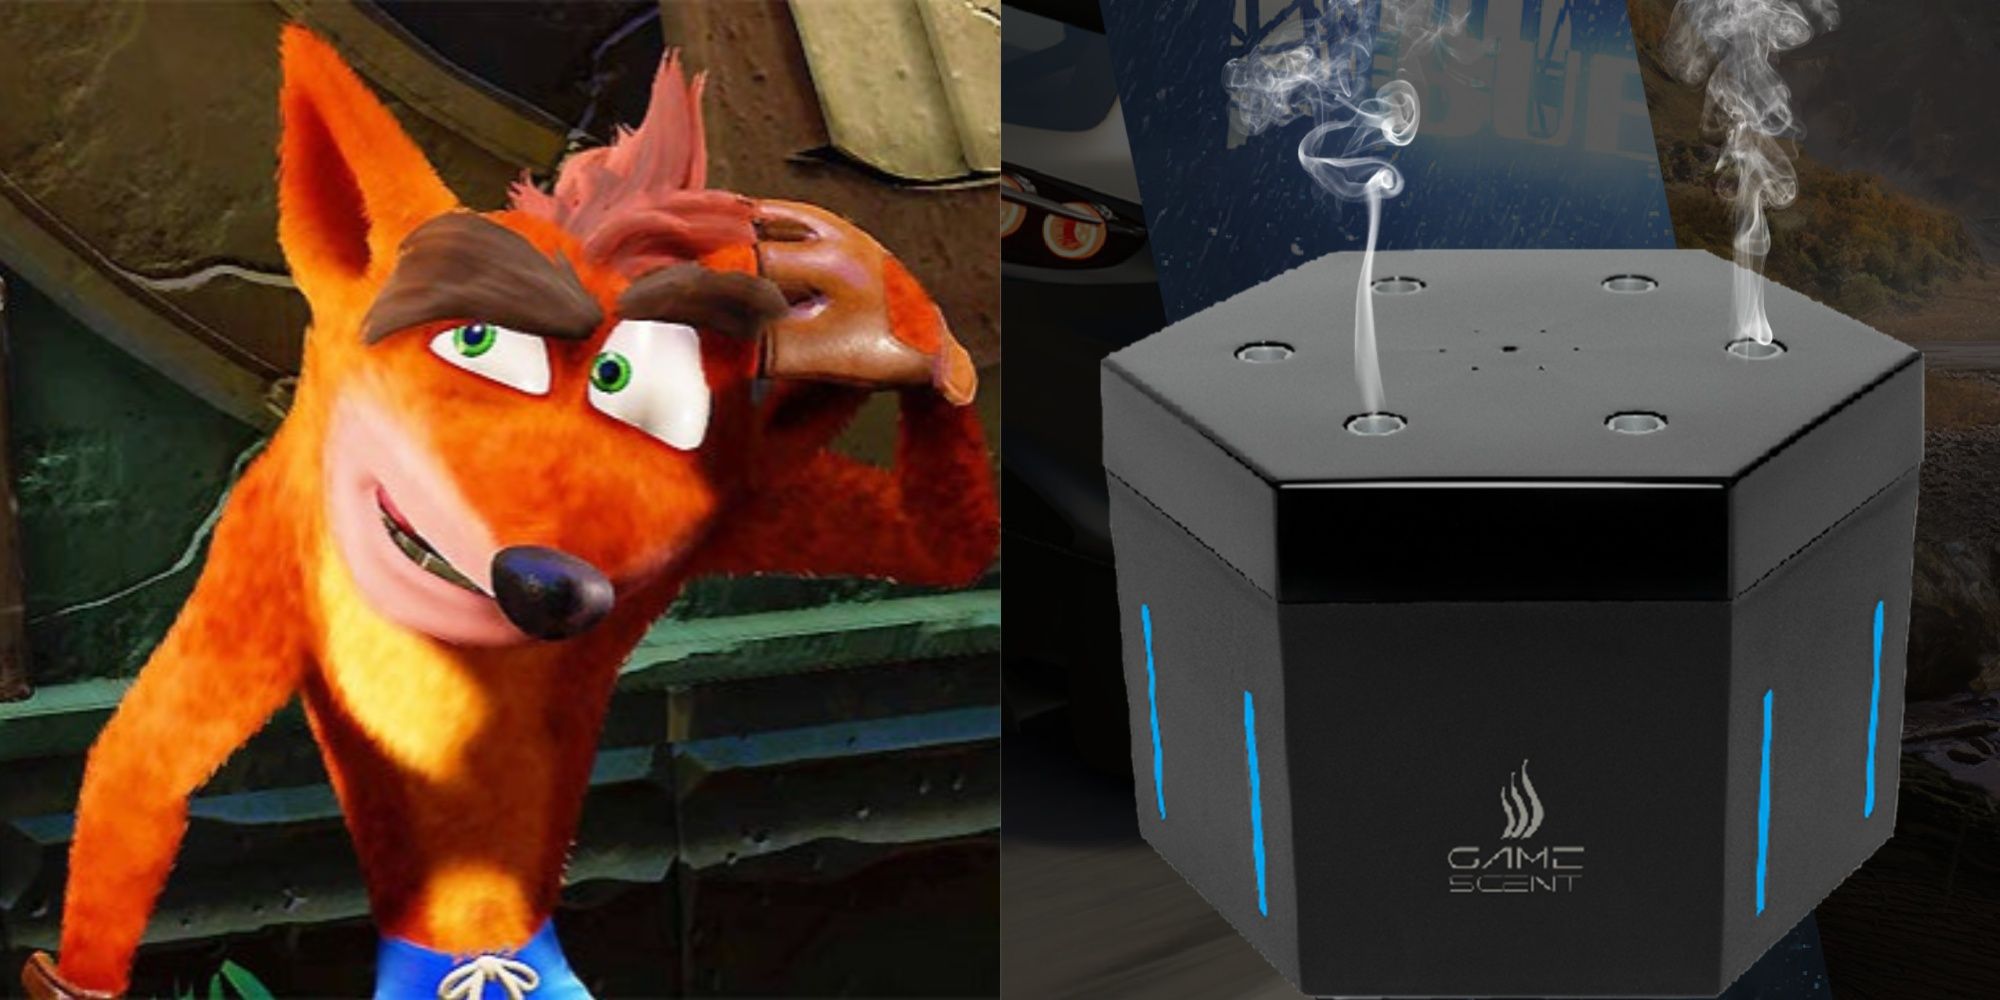 crash bandicoot scratching his head, and the gamescent emitting a smell